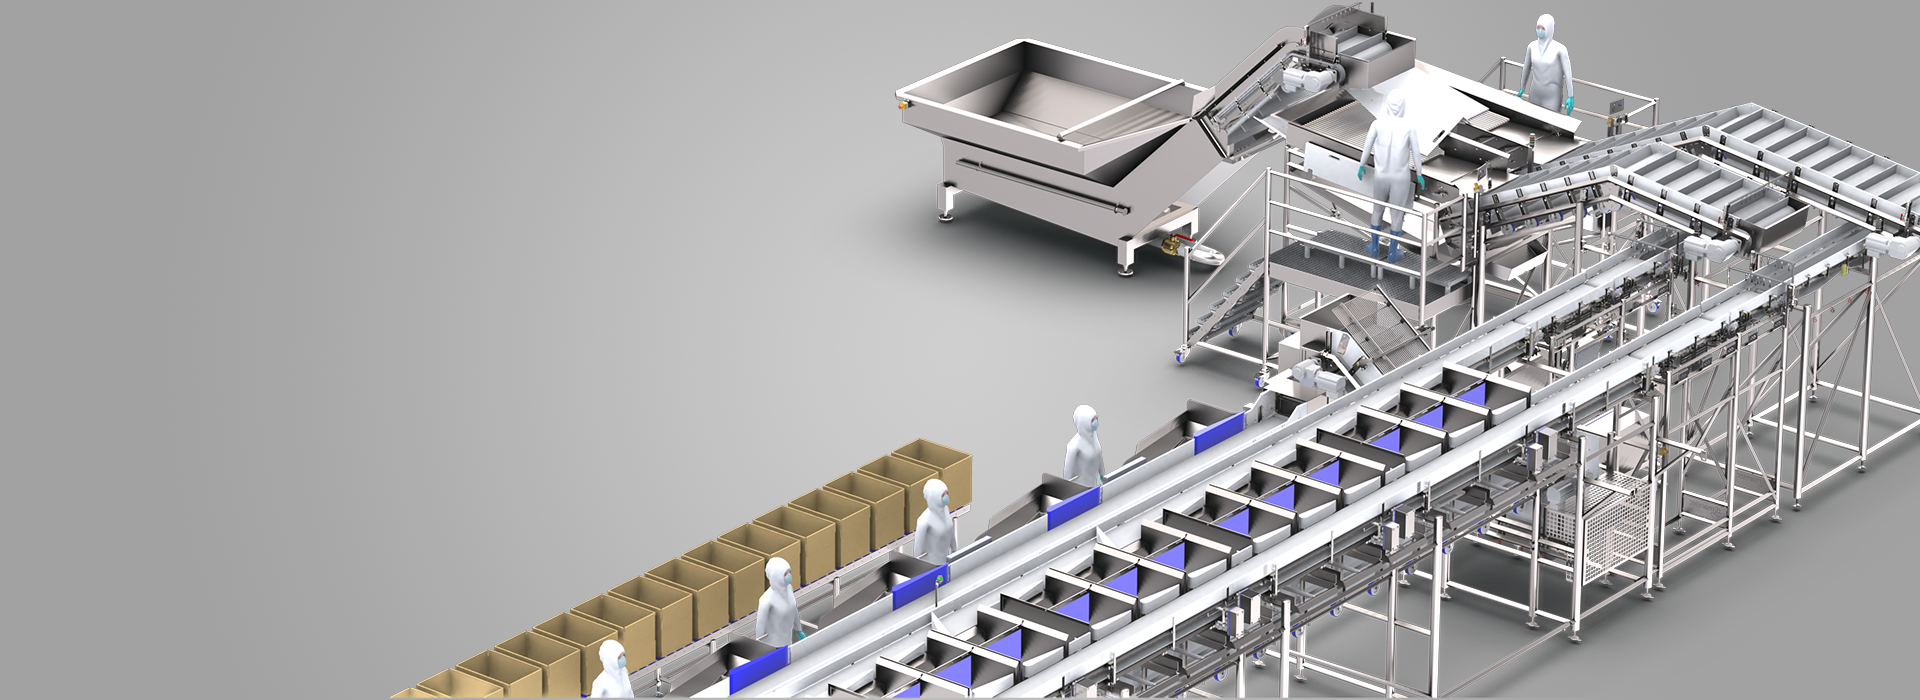 Integrated food processing solutions for fish